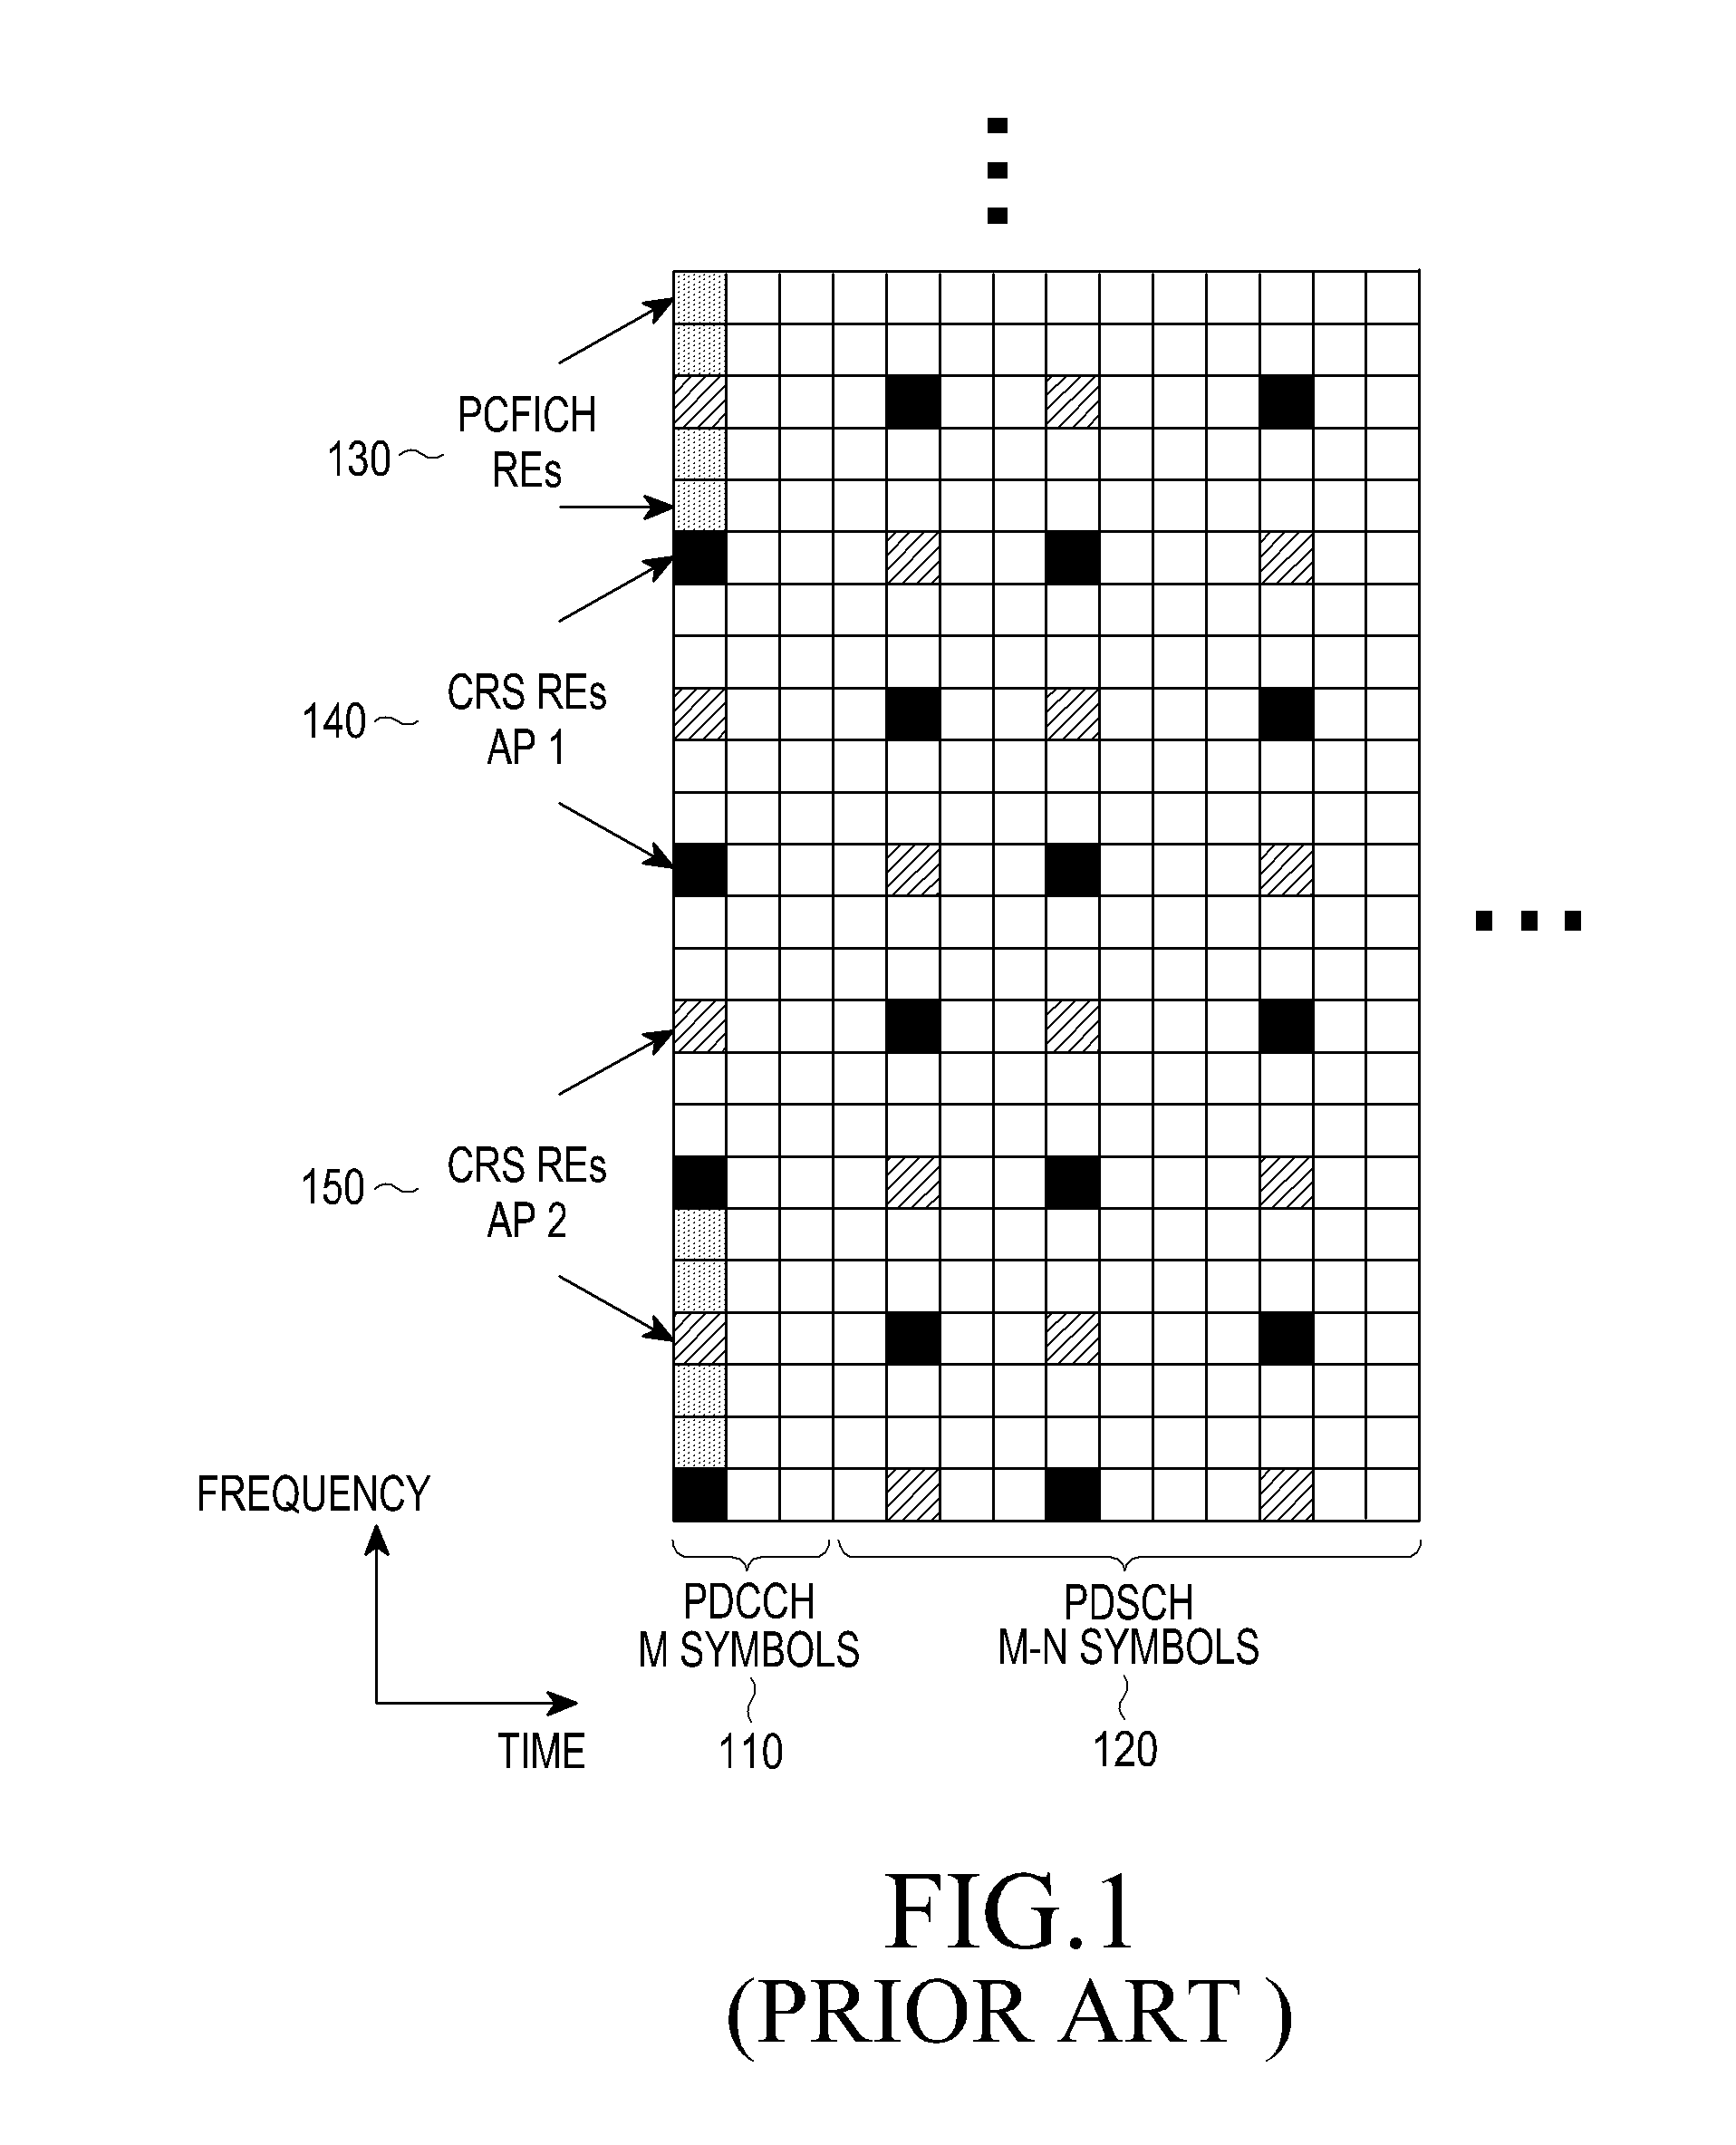 Extension of physical downlink control channels in a communication system